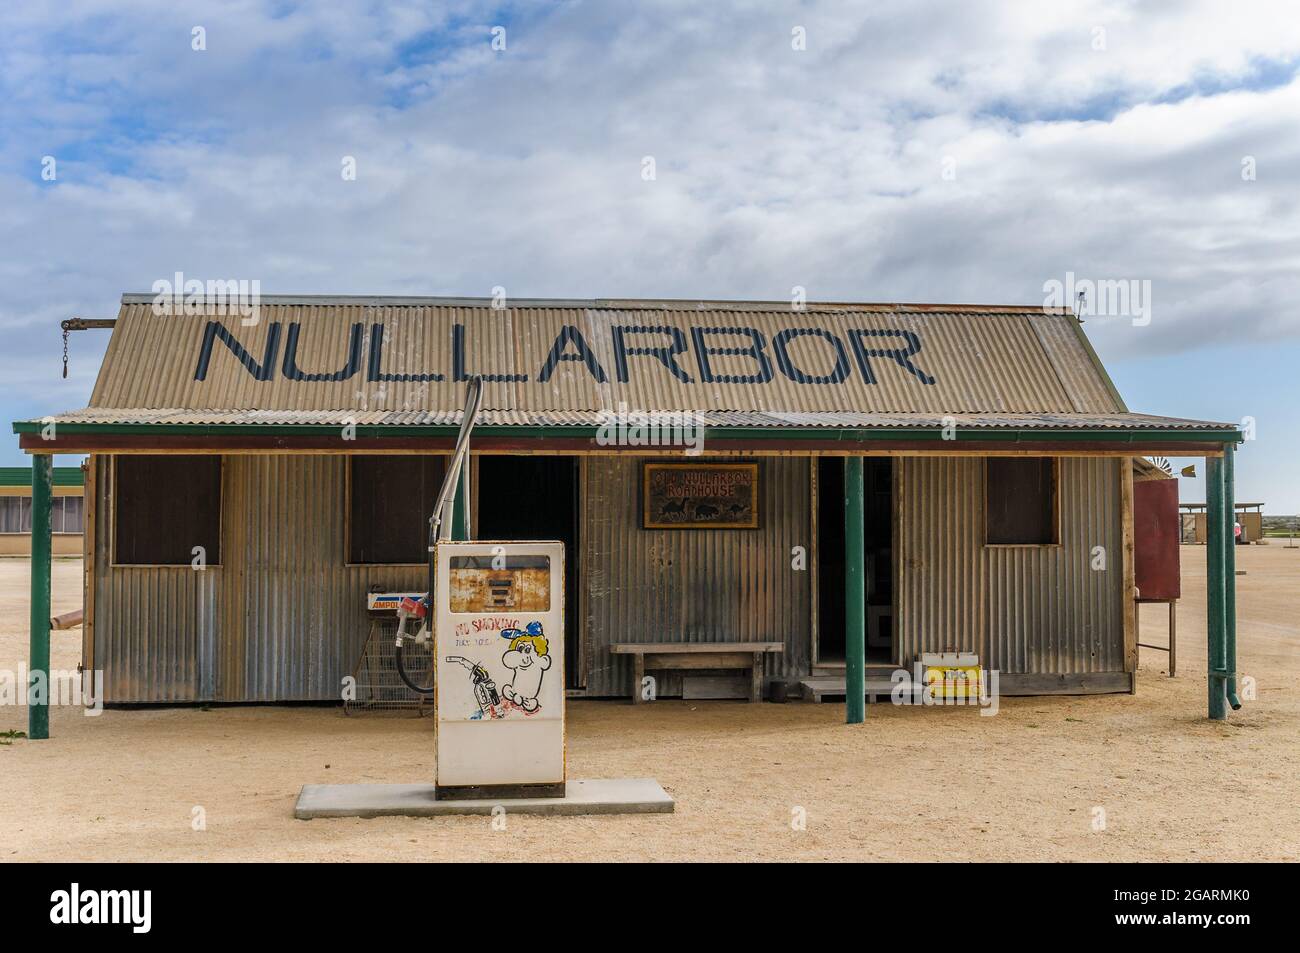 Restored historic relic of the Nullarbor Roadhouse fueling station on the Eyre Highway, South Australia near the Western Australia border. Stock Photo